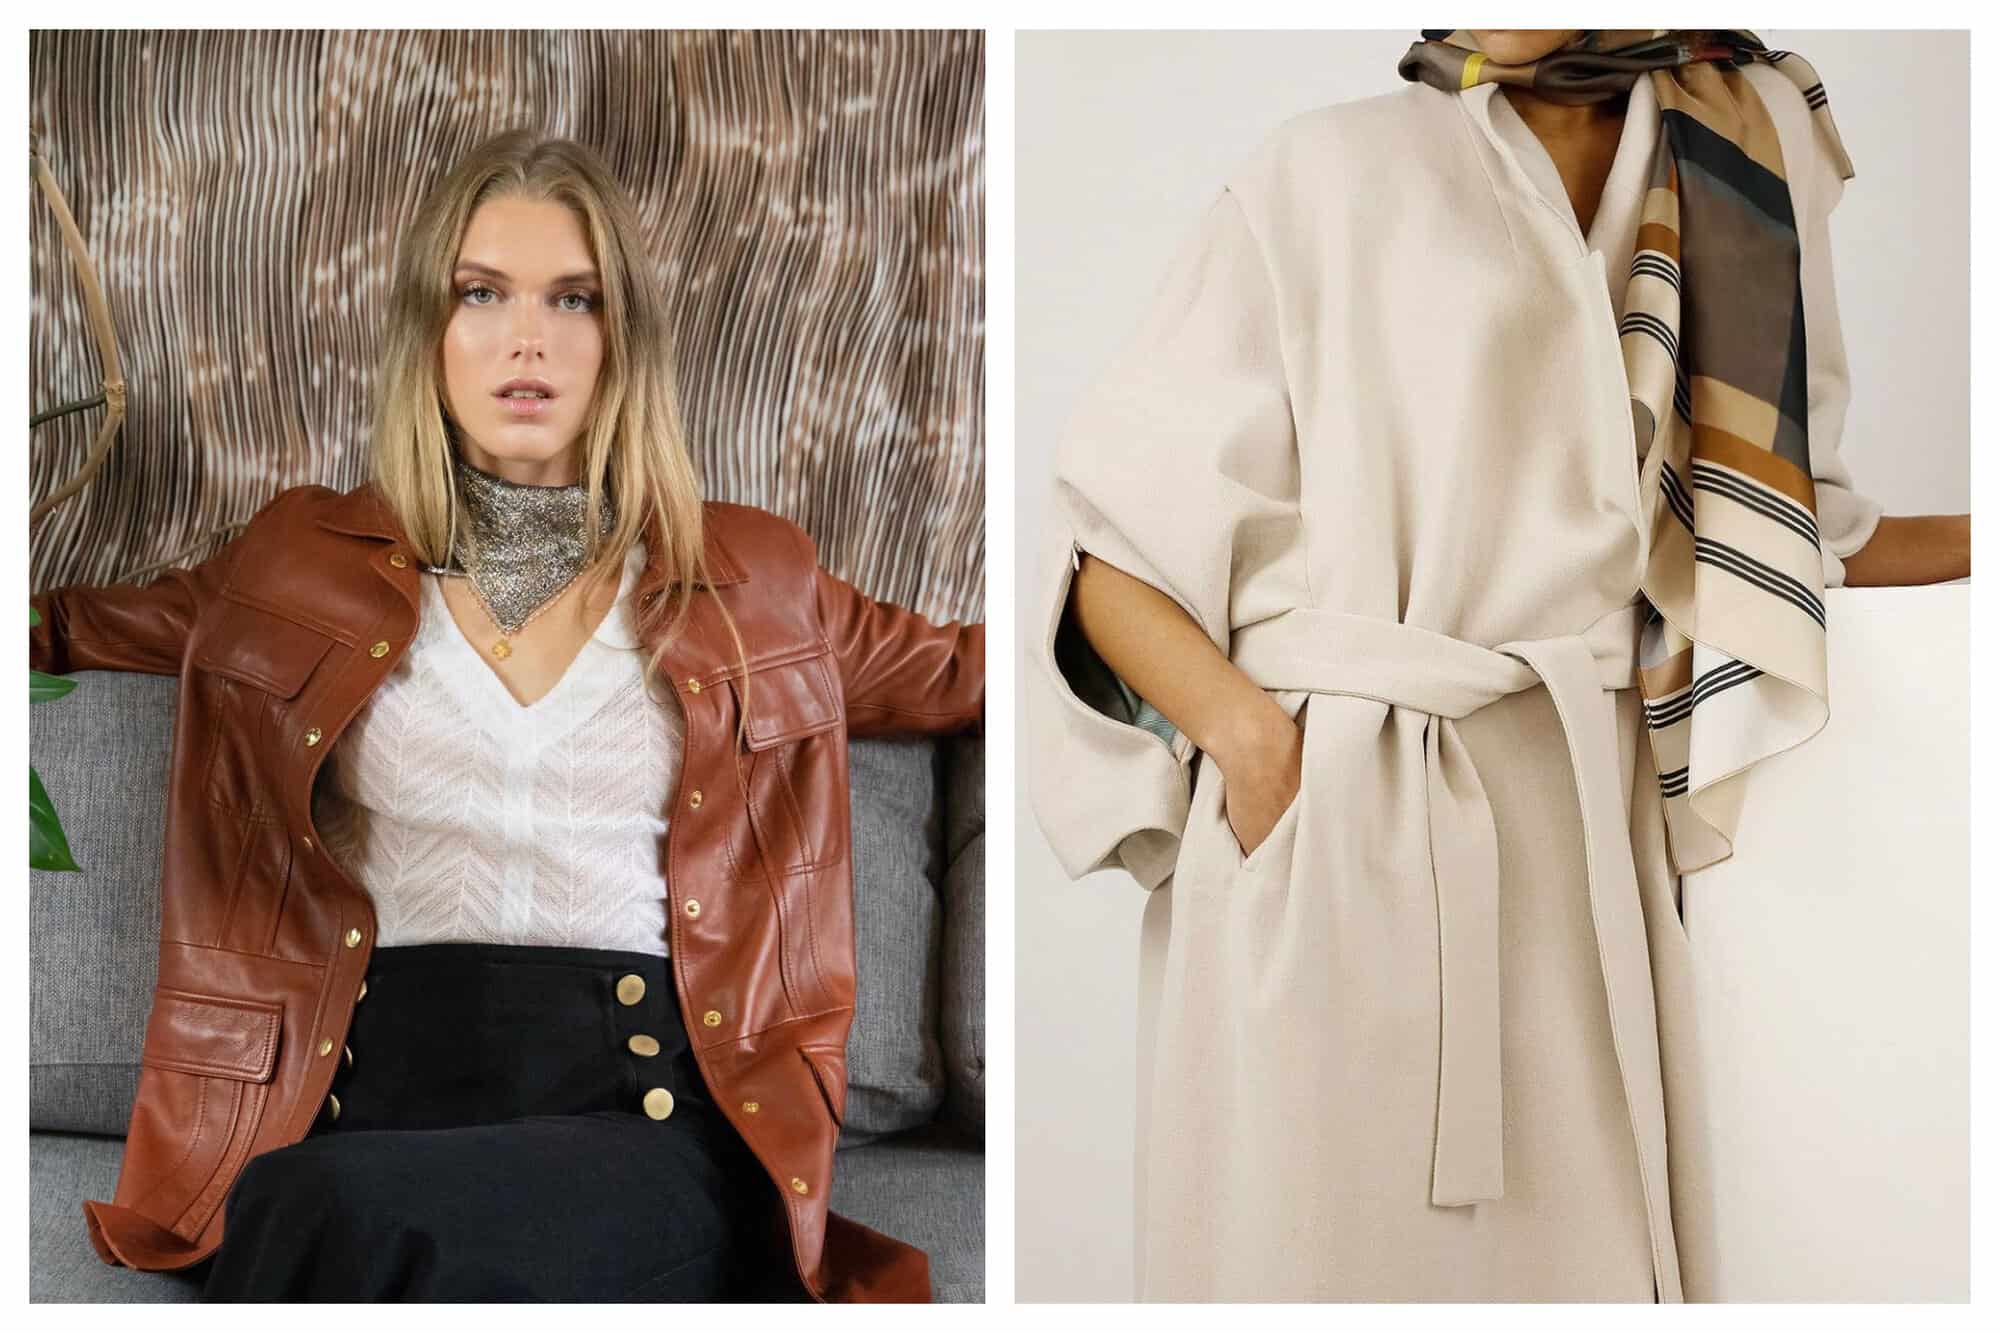 Left: A model from a local fashion brand in Le Marais called Koshka is pictured wearing a brown leather blazer, white V-neck shirt and black pencil skirt. Right: A model from a local fashion brand in Le Marais called Ekjo is wearing a sleek beige coat with an oversized silk scarf.